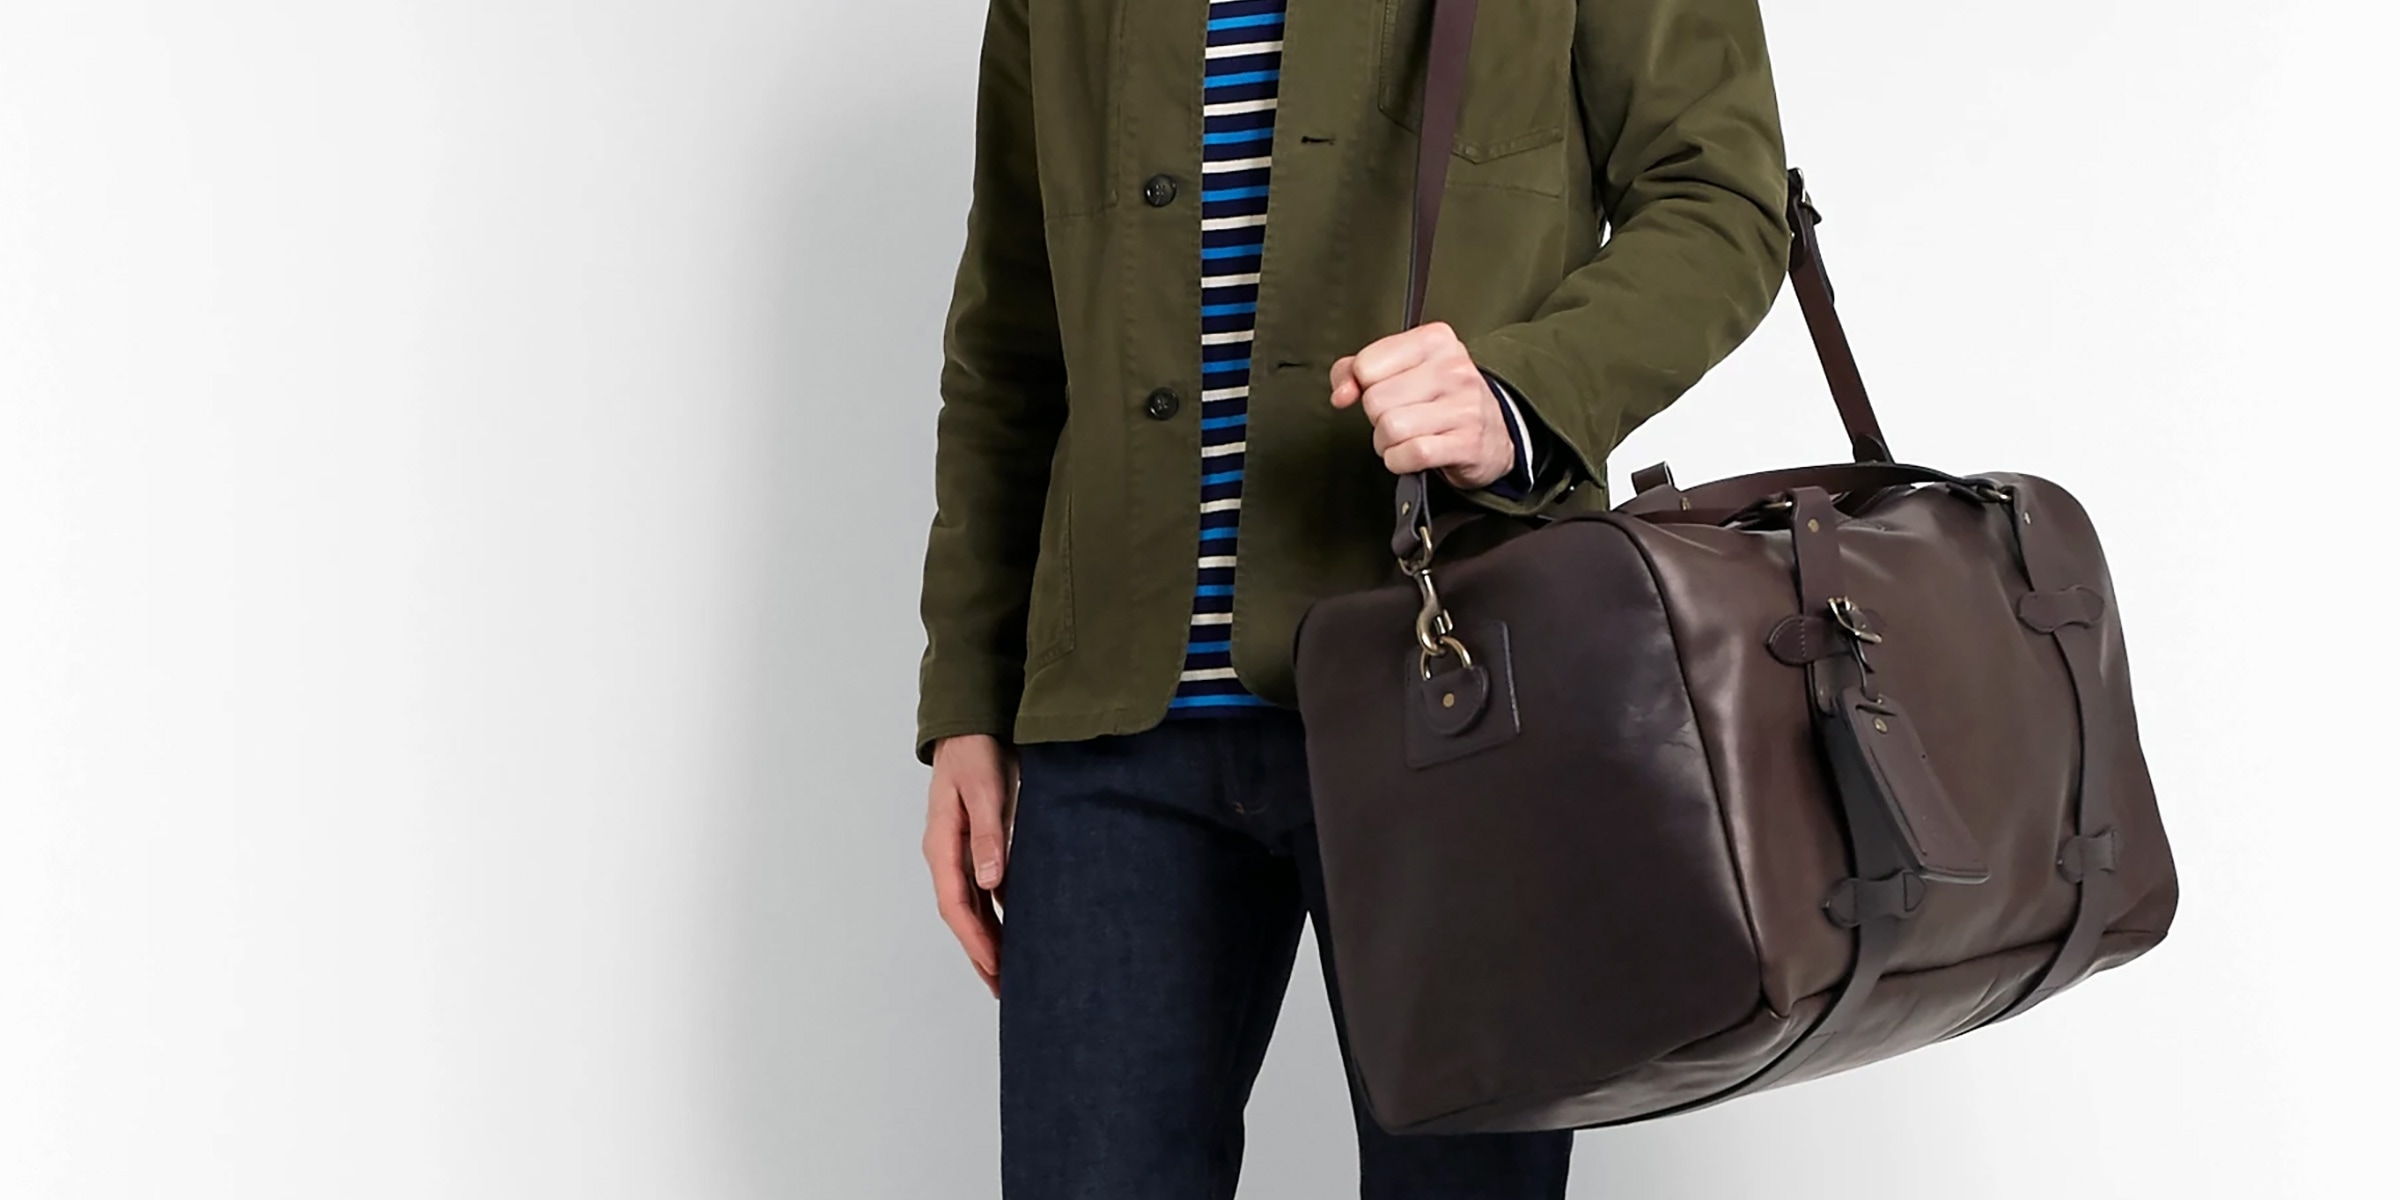 keep-calm-and-carry-it-all-with-these-duffel-bags